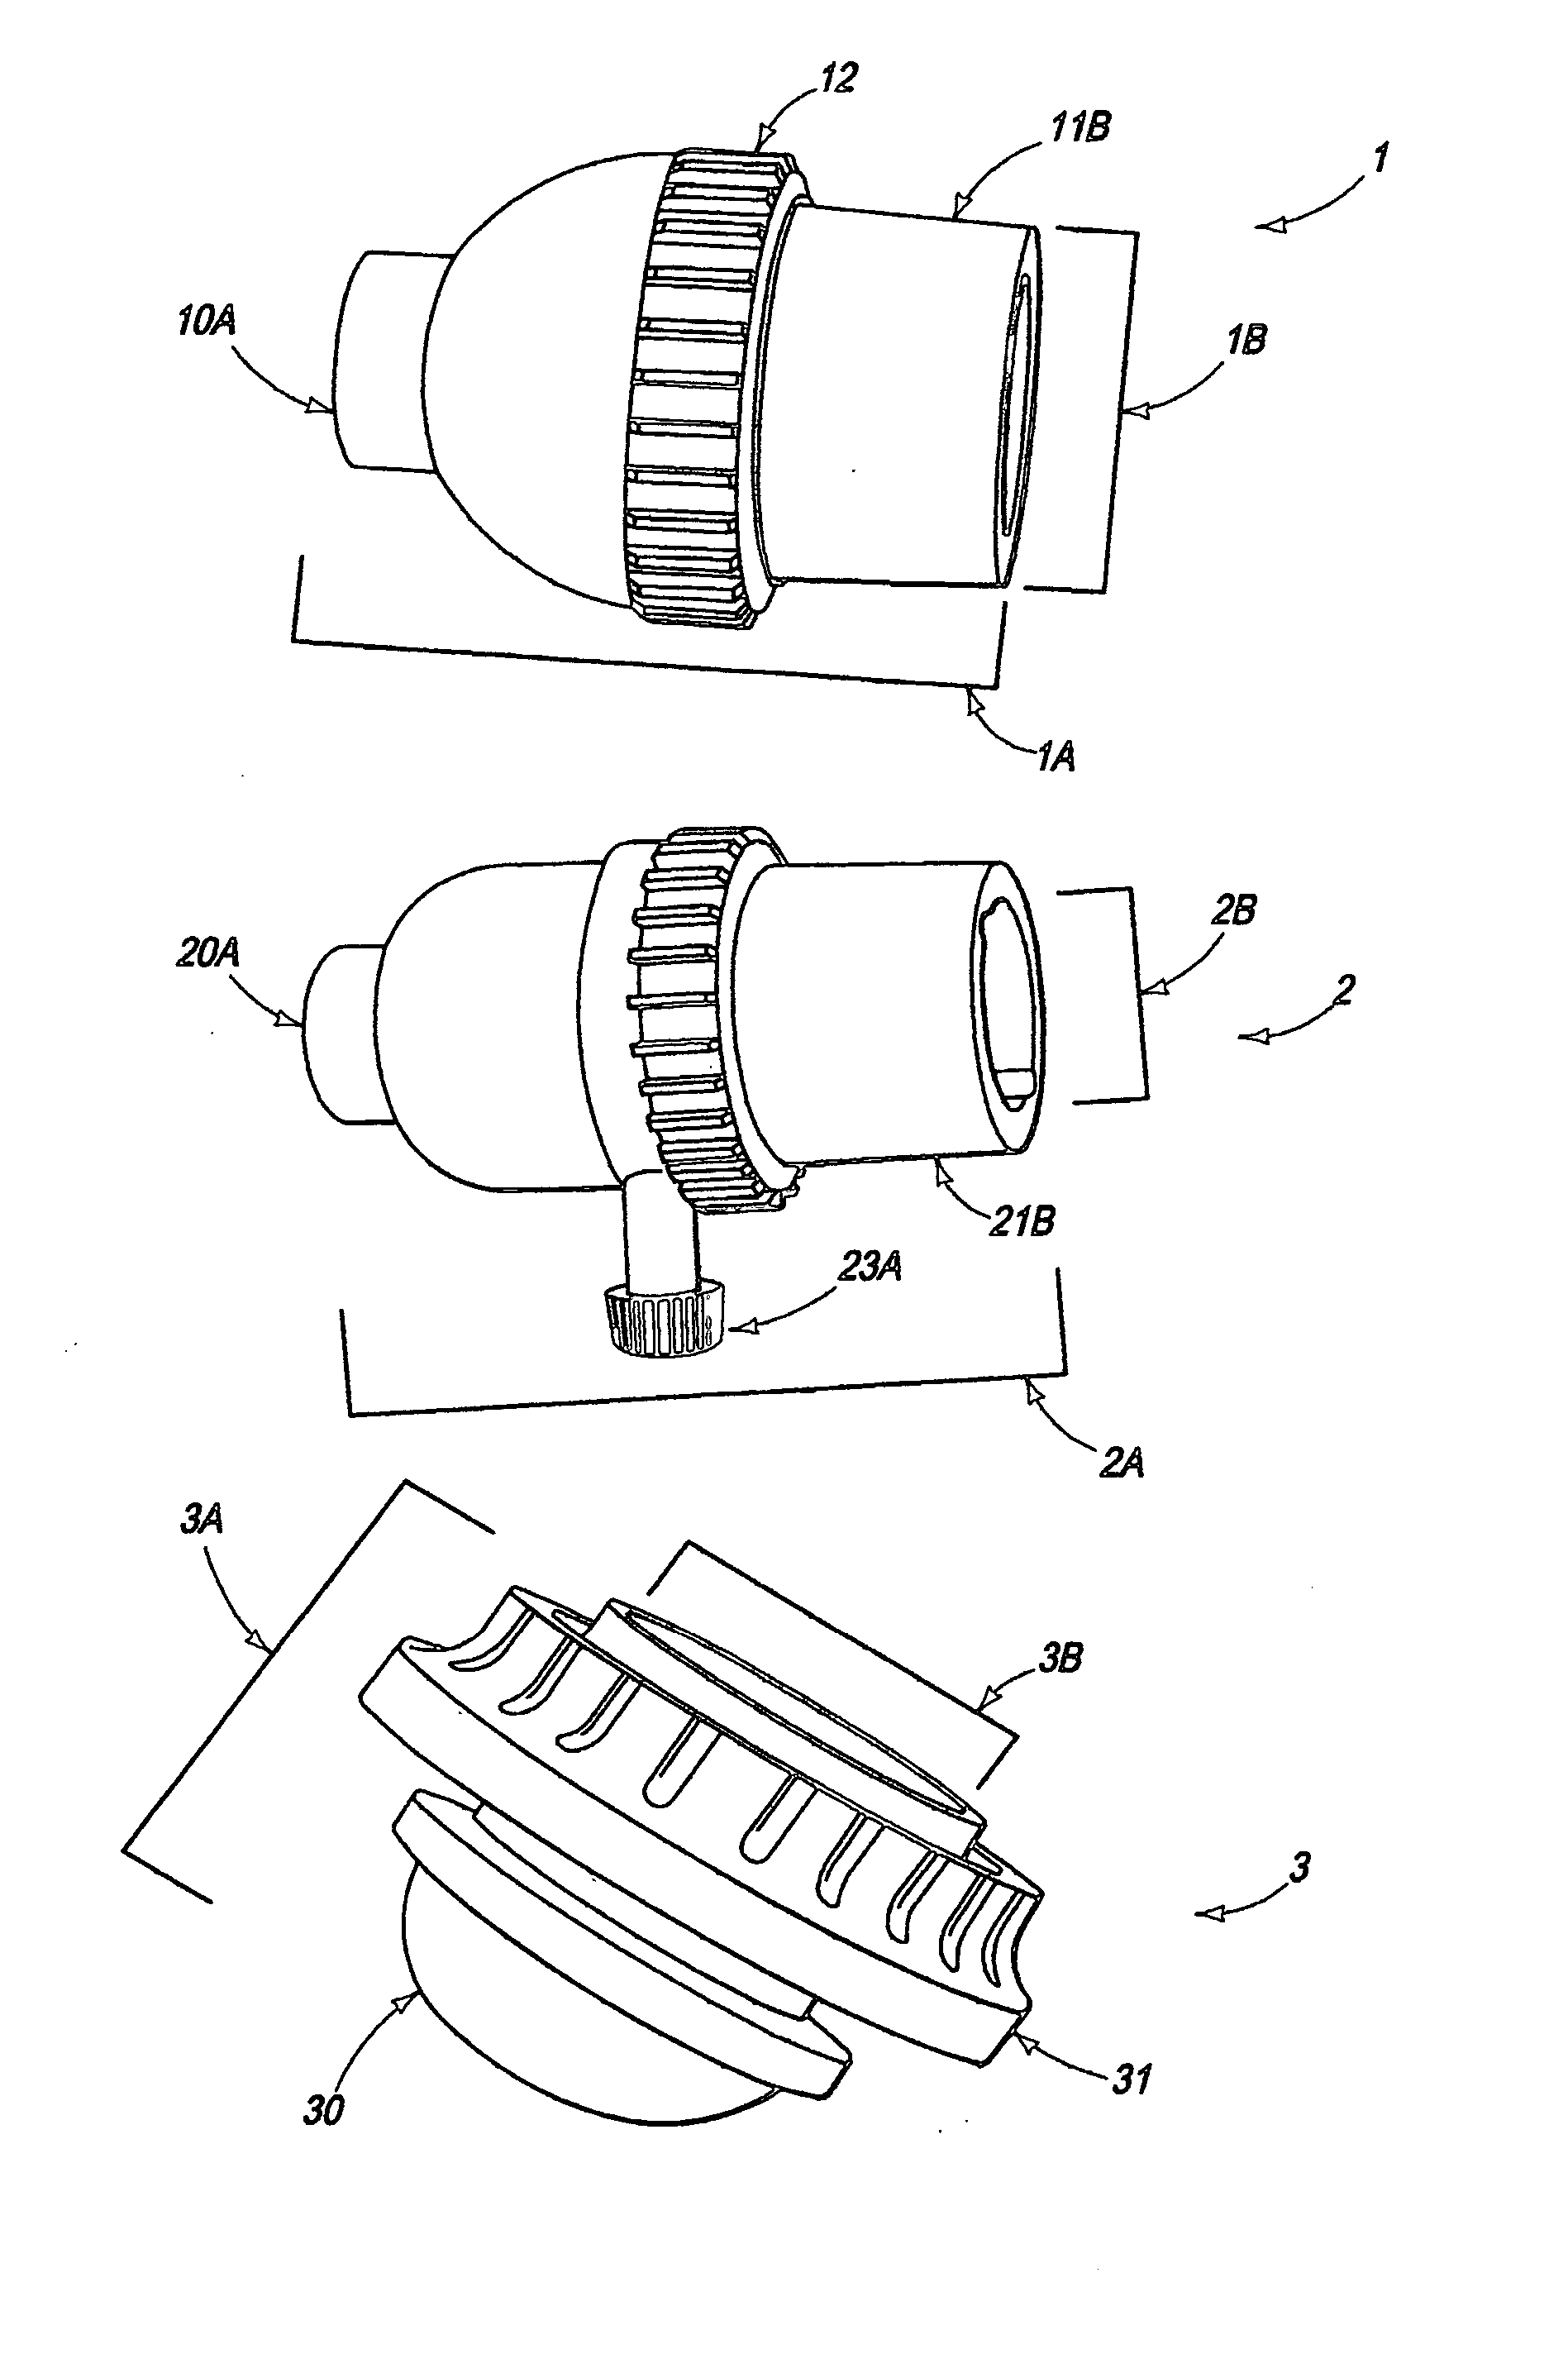 Light bulb theft-reduction apparatus and method of use